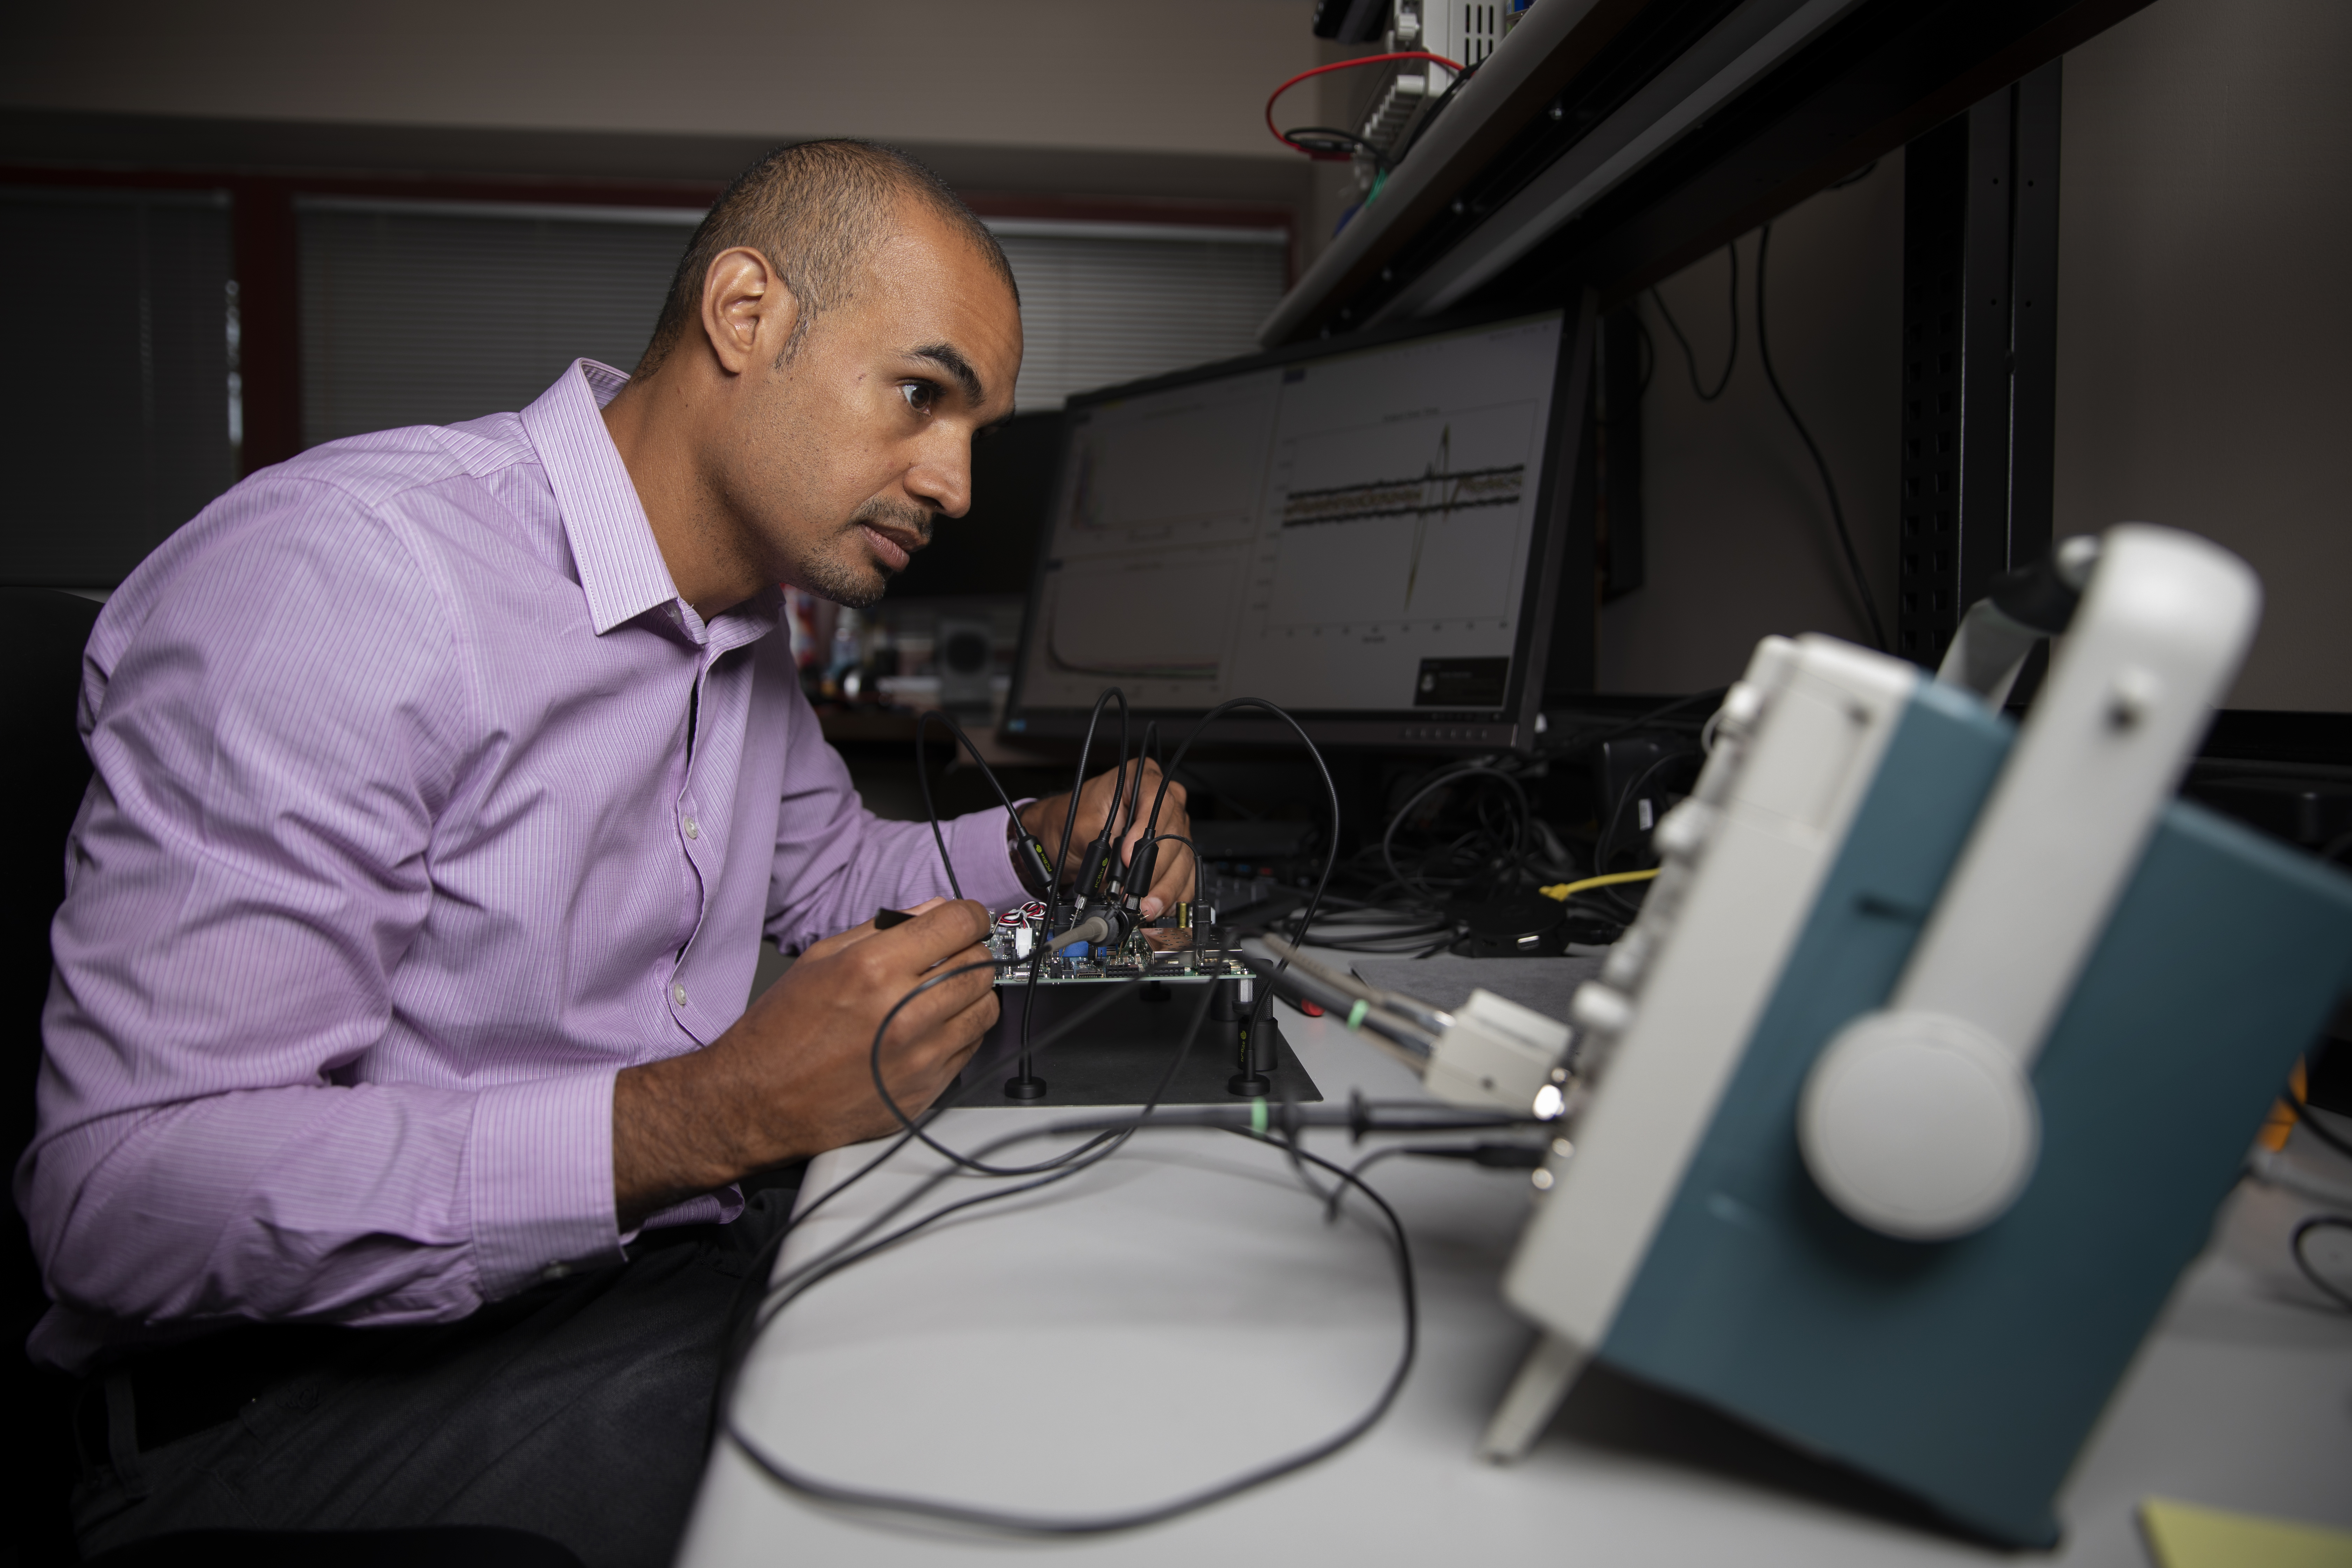 Mike Ruiz is shown using an oscilloscope, a type of electronic test instrument that graphically displays varying signal voltages, (Photo credit: Sean McNeil)